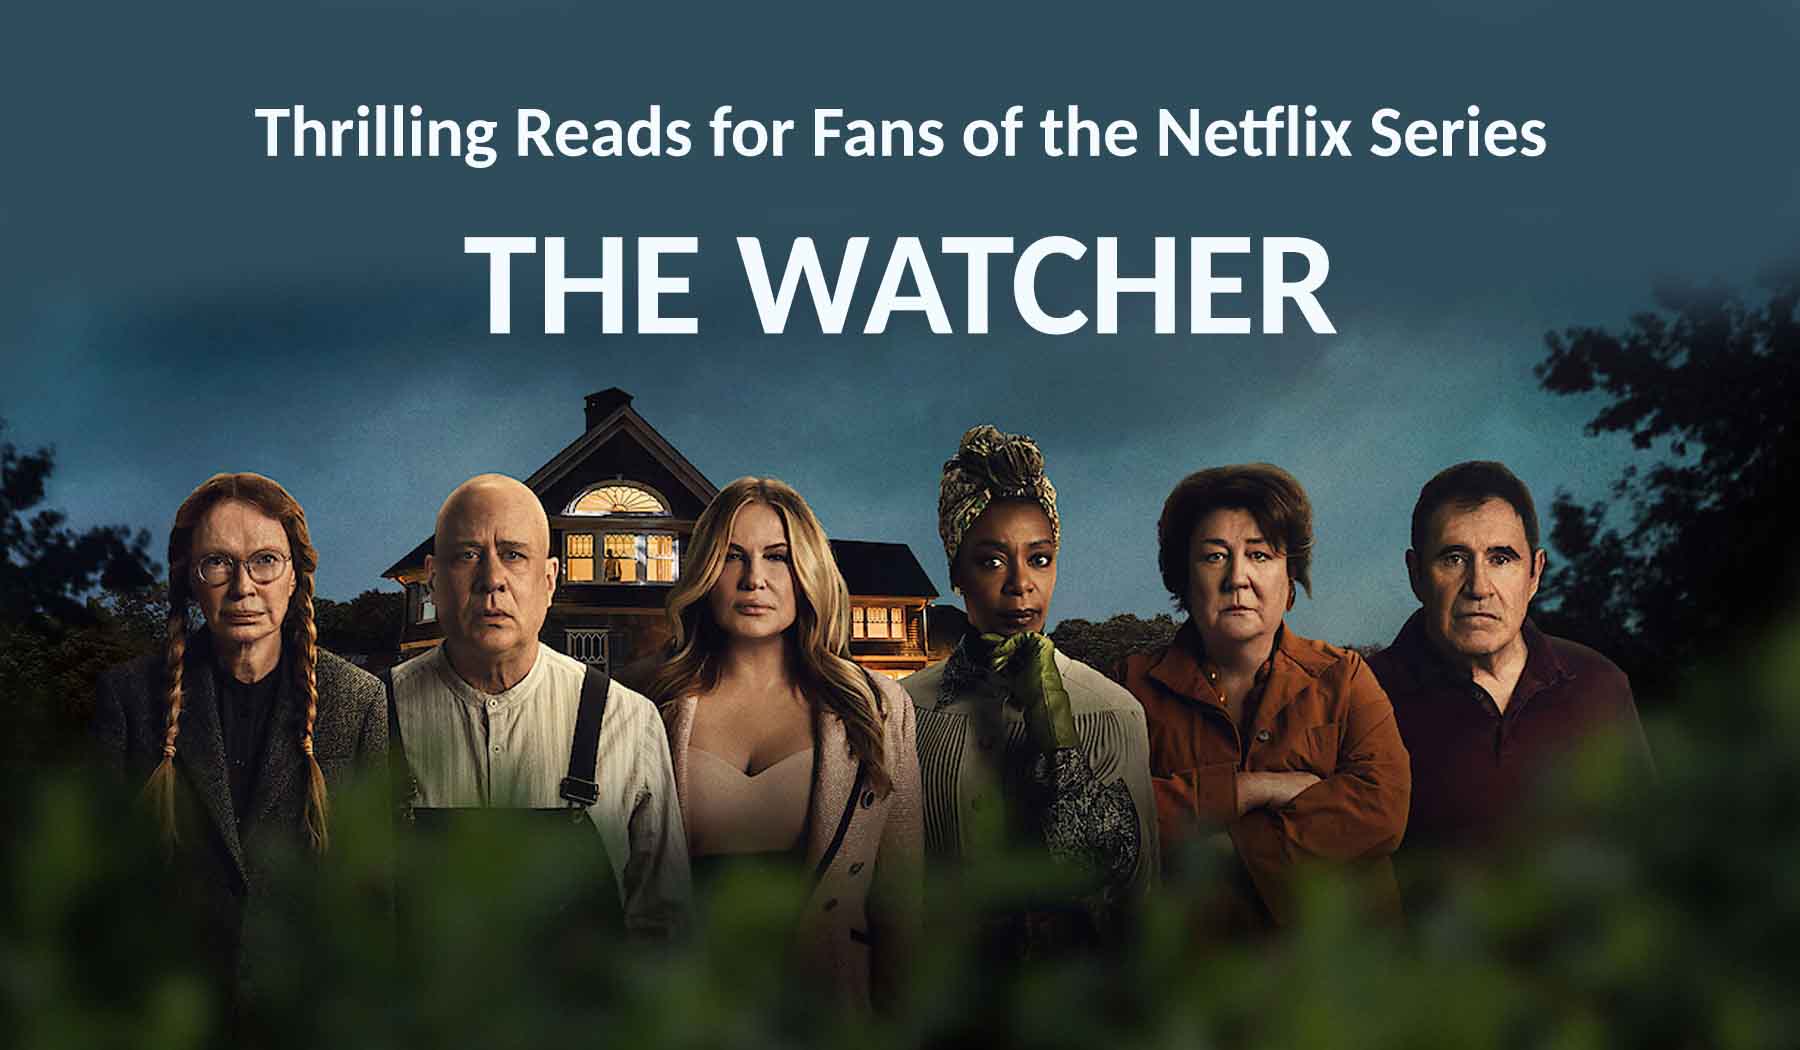 Thrilling Reads for Fans of The Watcher